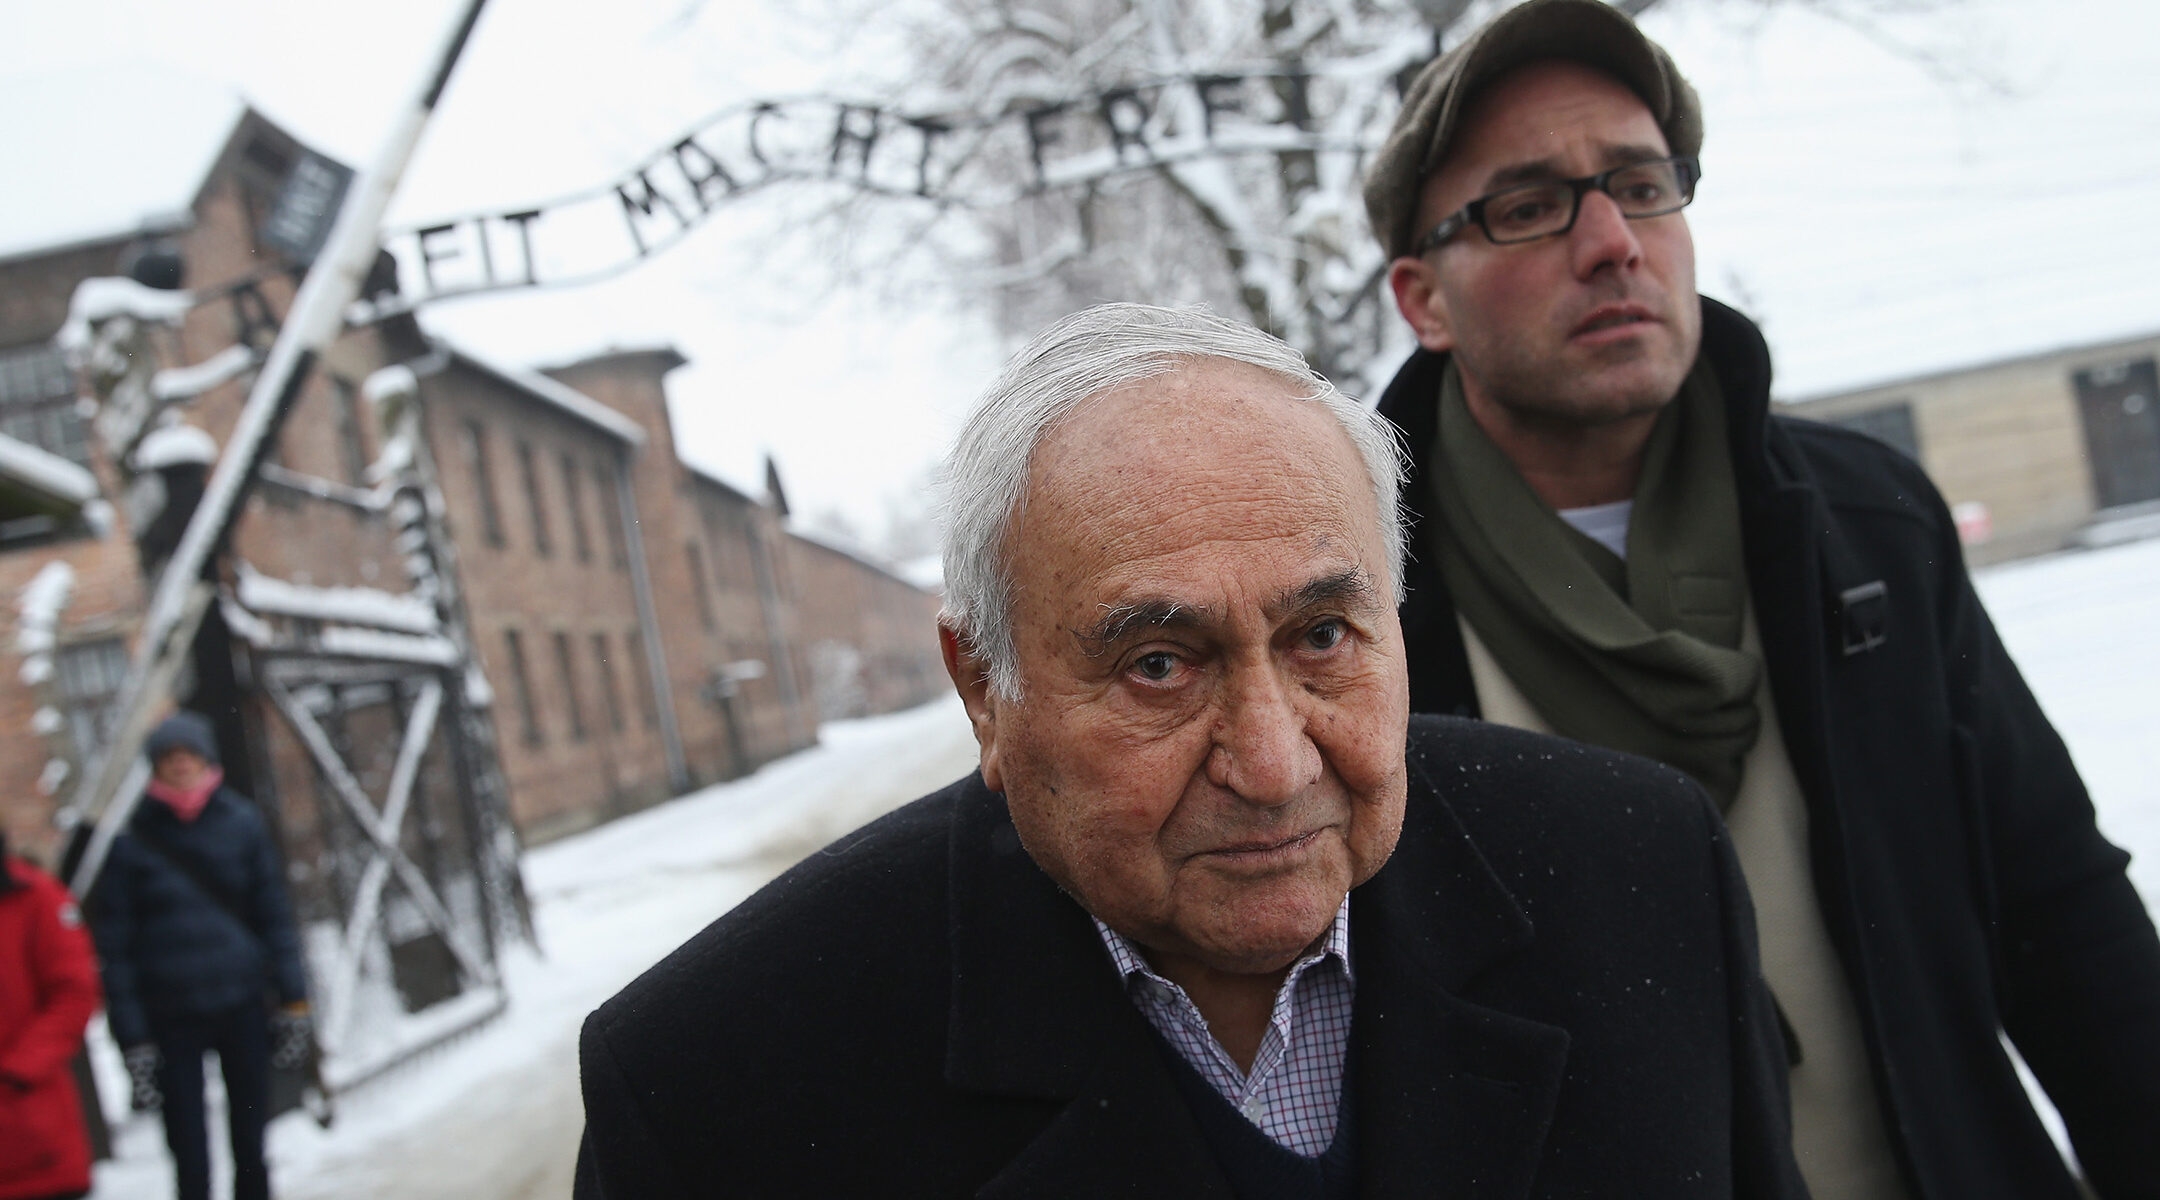 Gabor Hirsch visits the former Auschwitz I concentration camp in Poland on January 26, 2015 (Sean Gallup/Getty Images)